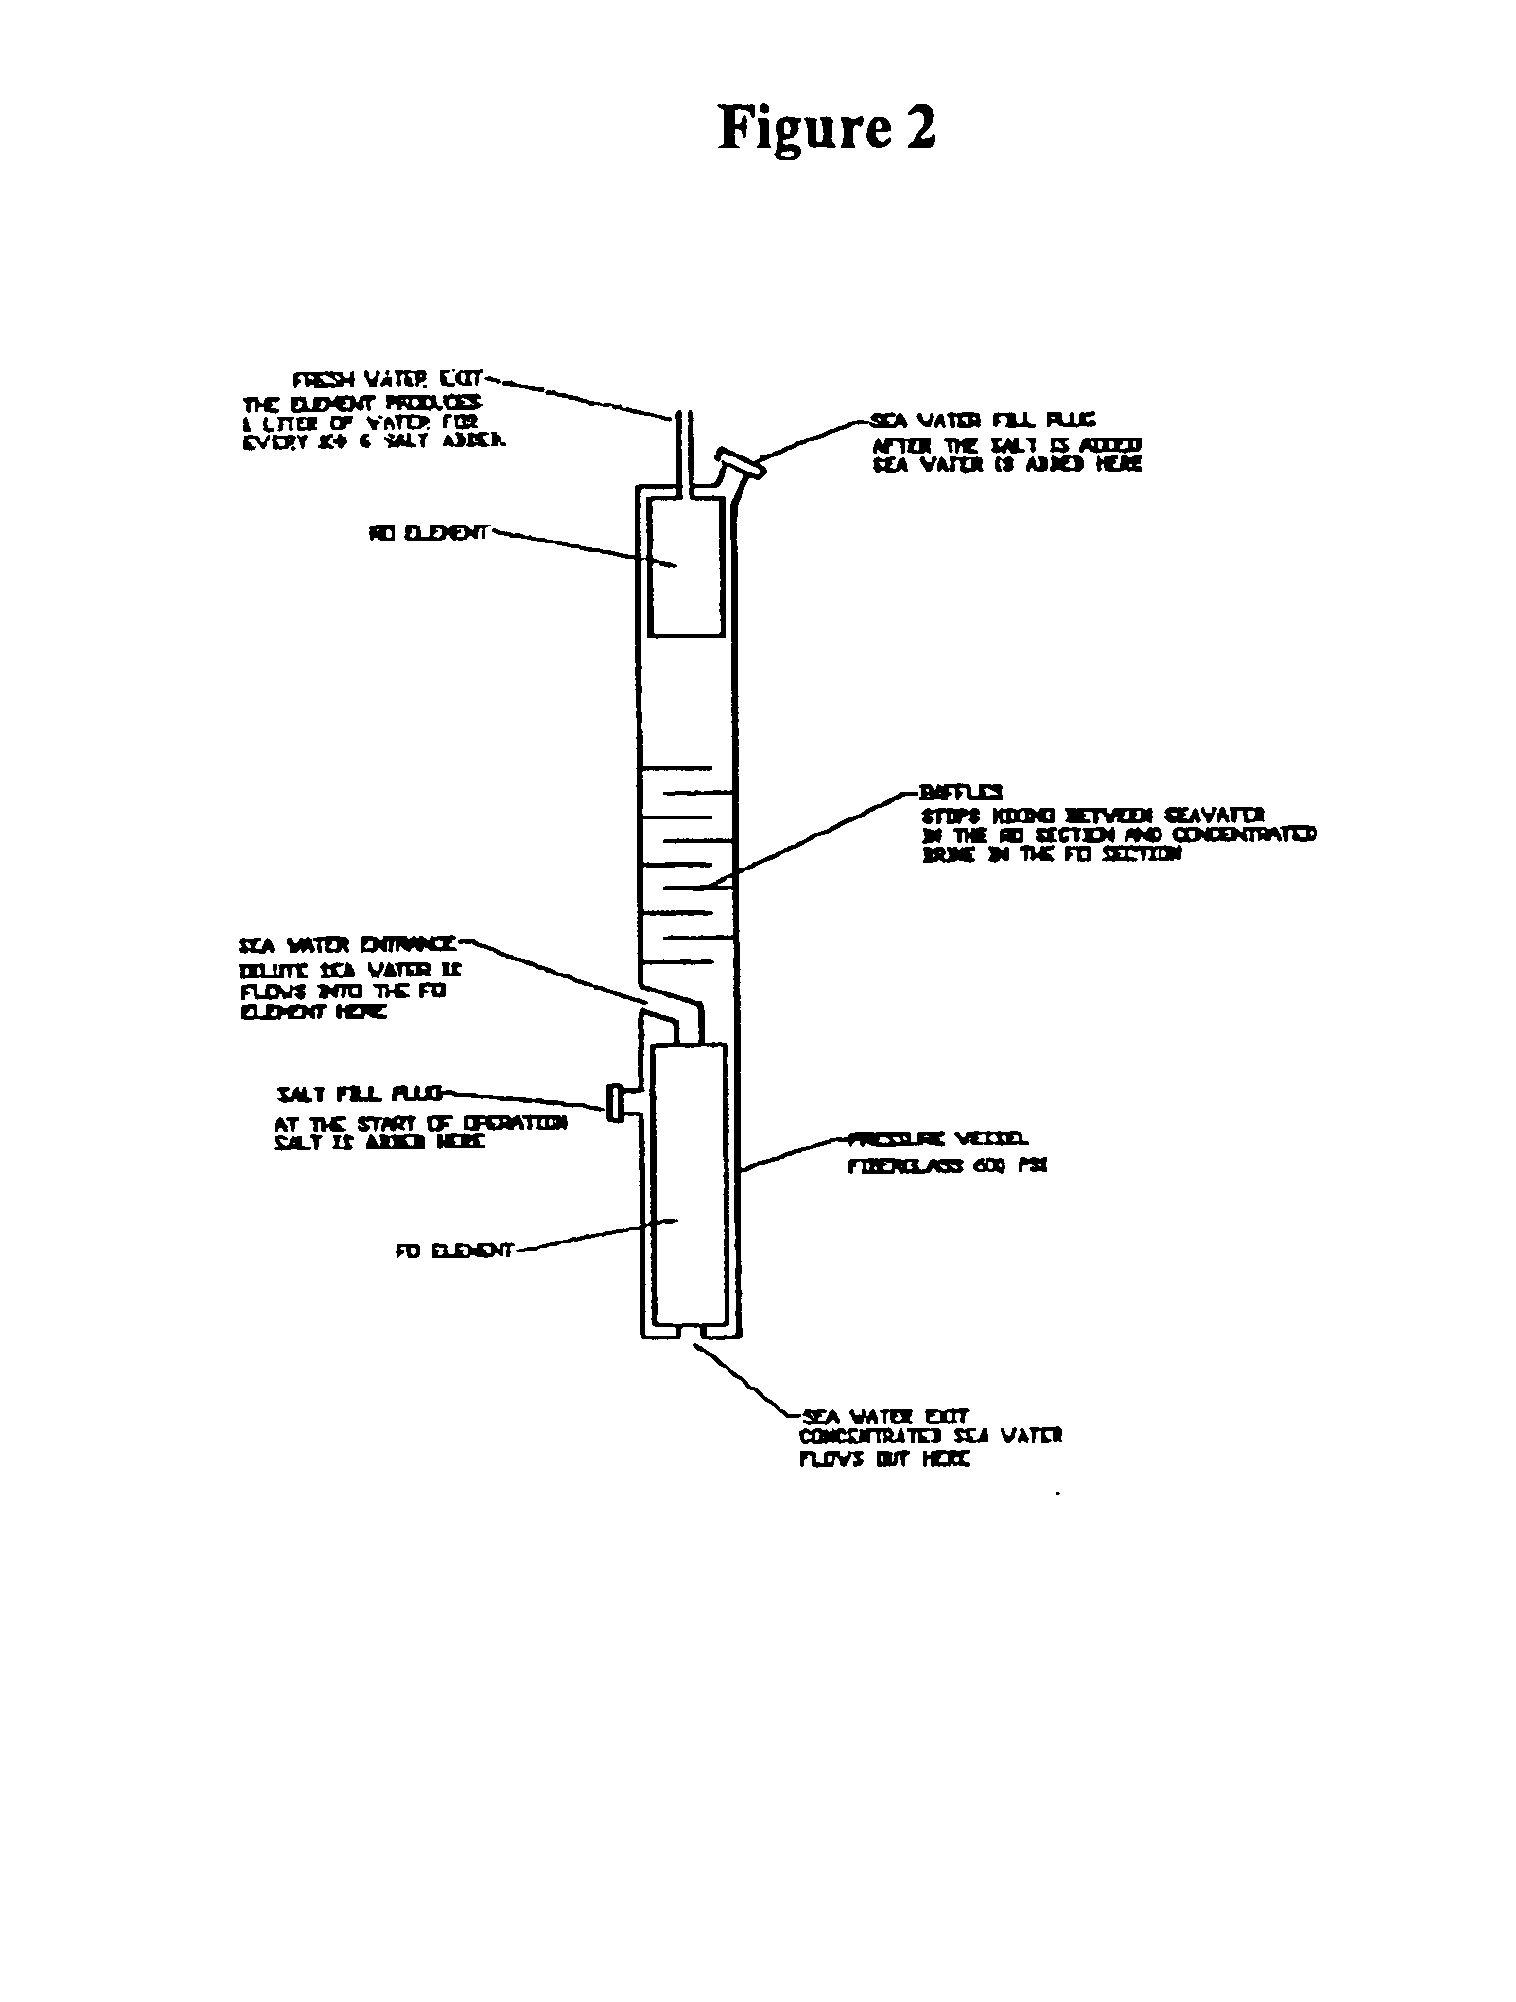 Forward osmosis pressurized device and process for generating potable water